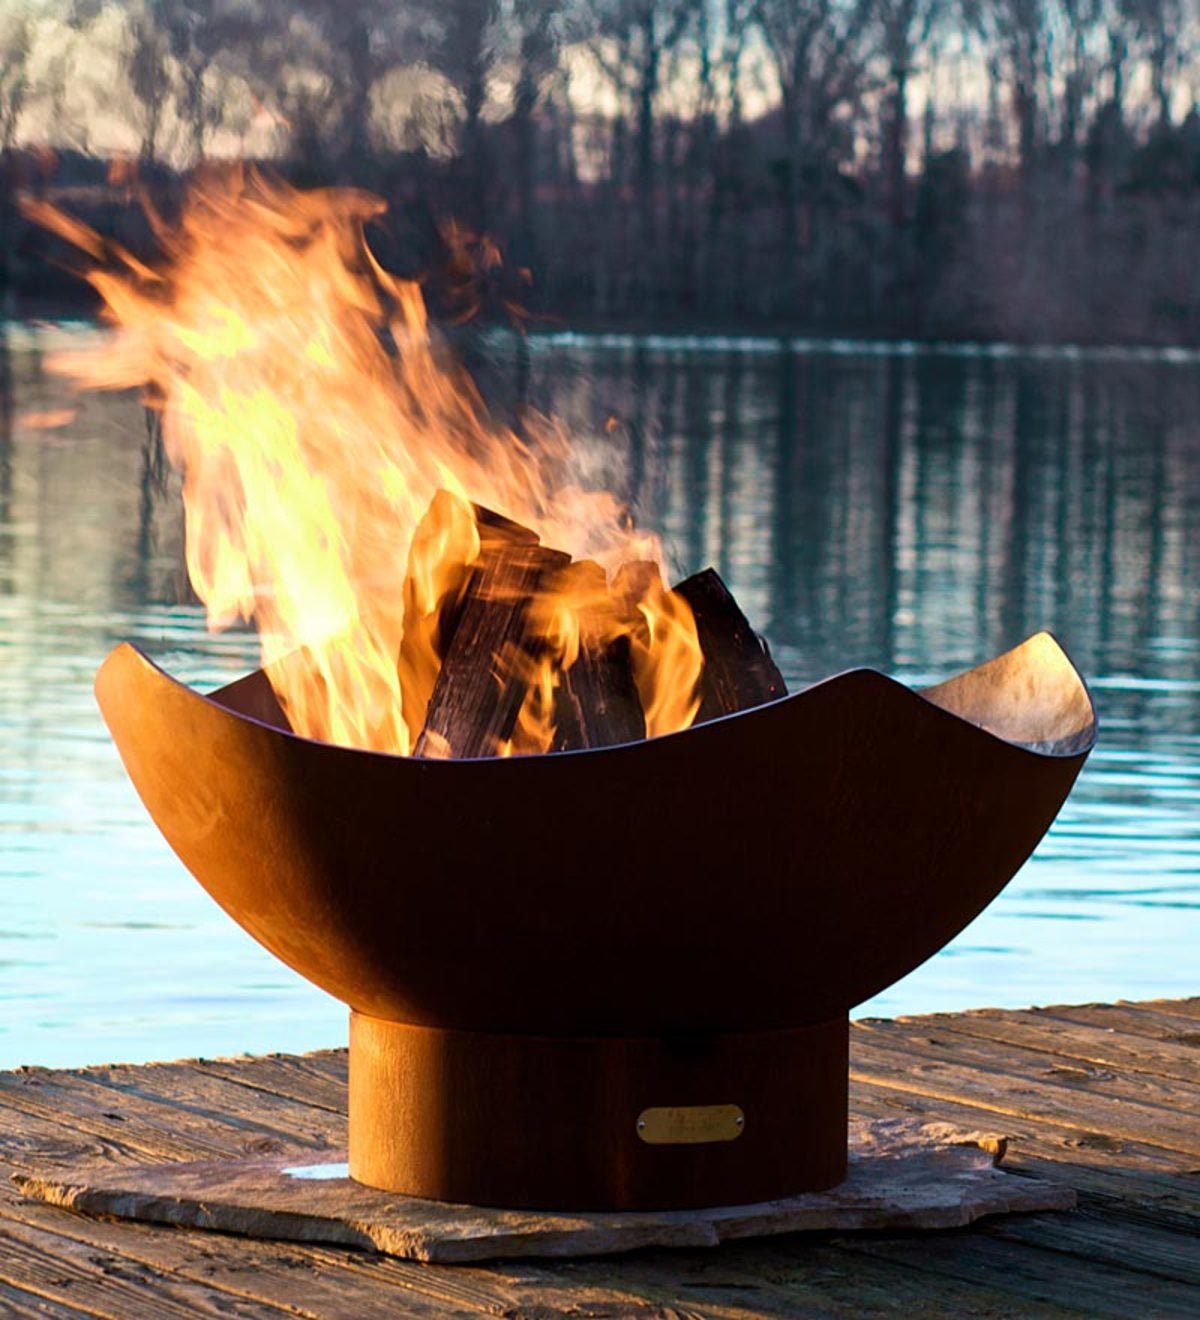 American-Made Firepit Art Manta Ray Fire Pit